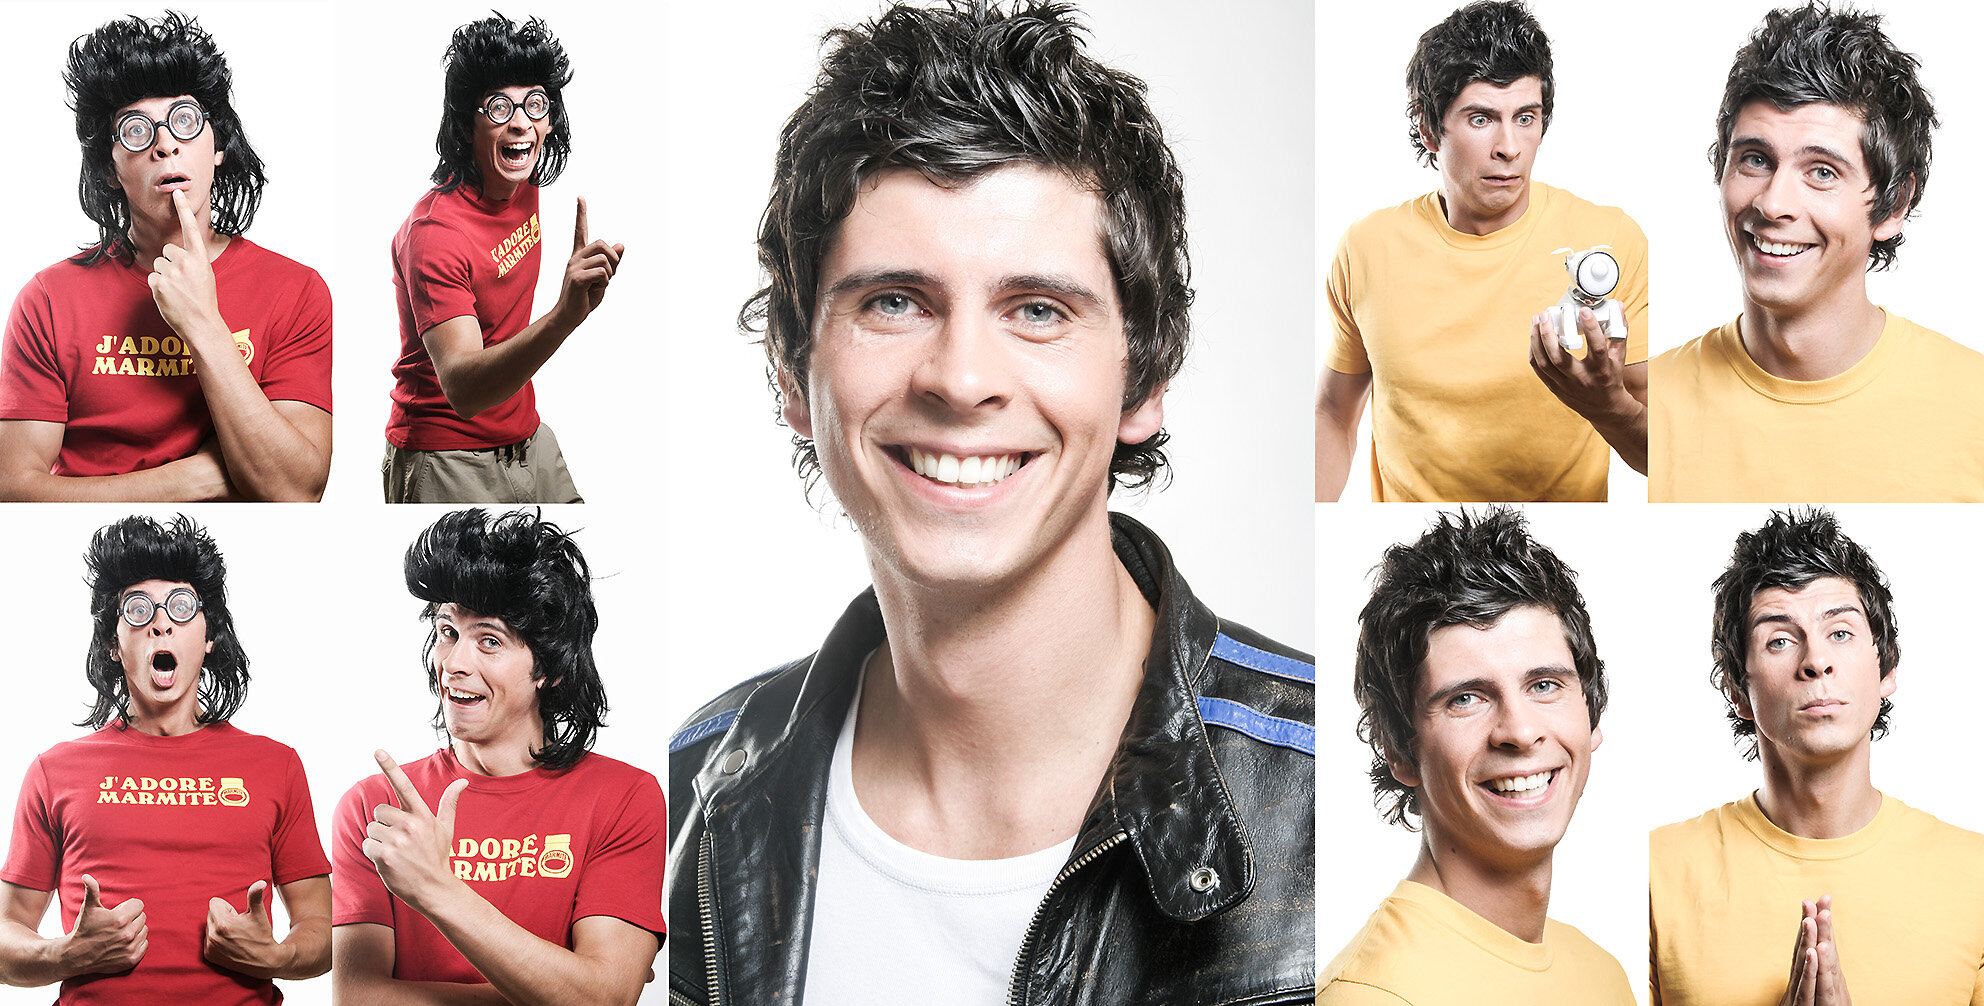 TV presenter and entertainer Andy Day